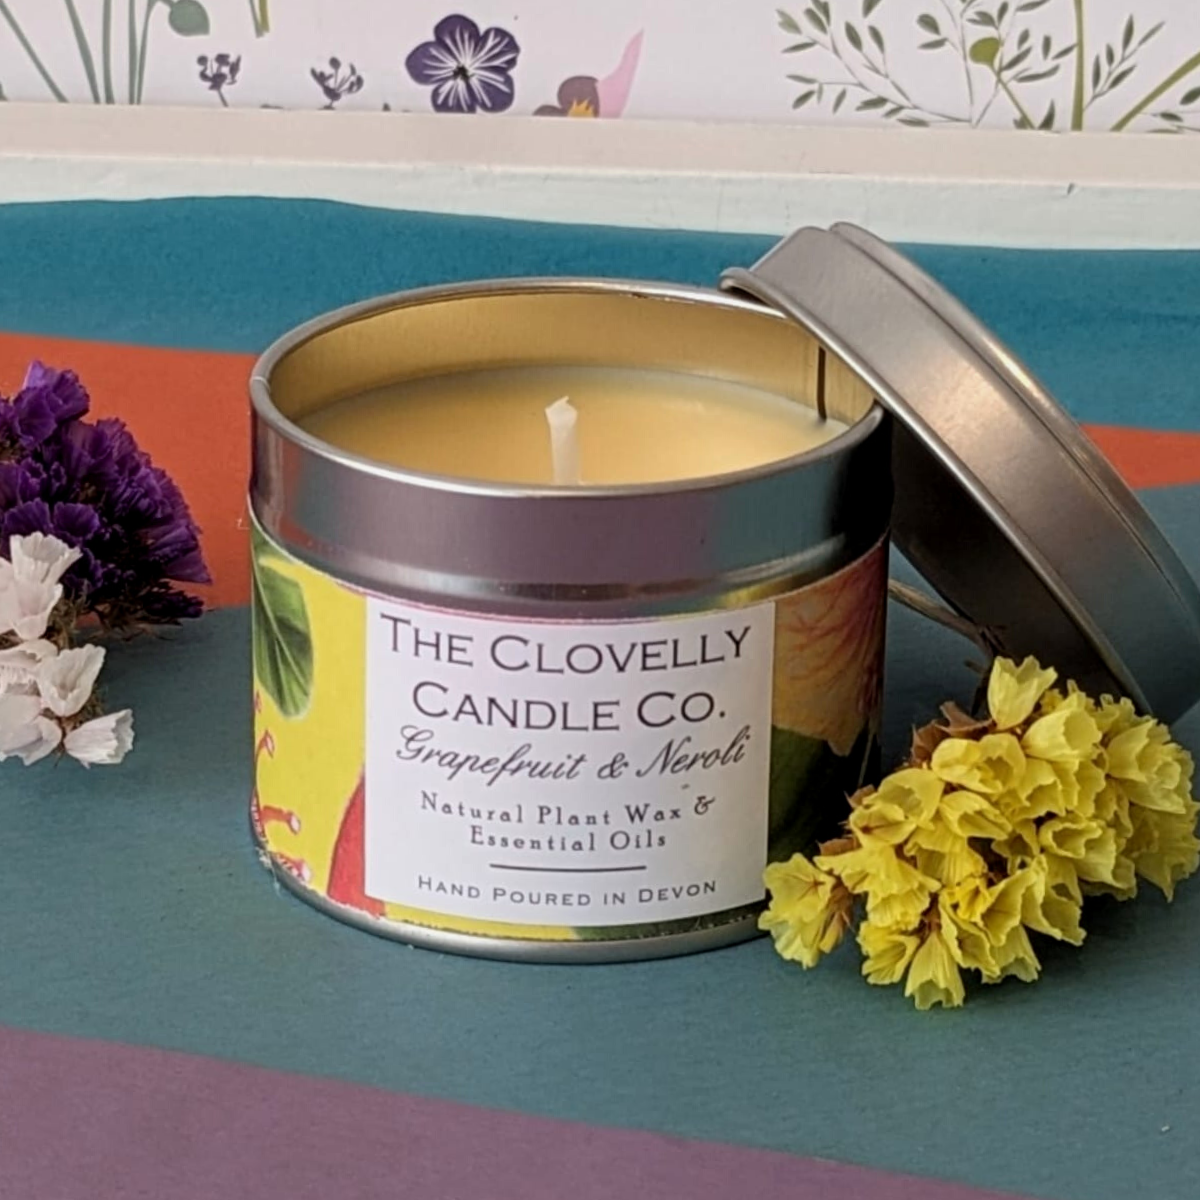 Clovelly grapefruit & neroli essential oil candle in tin